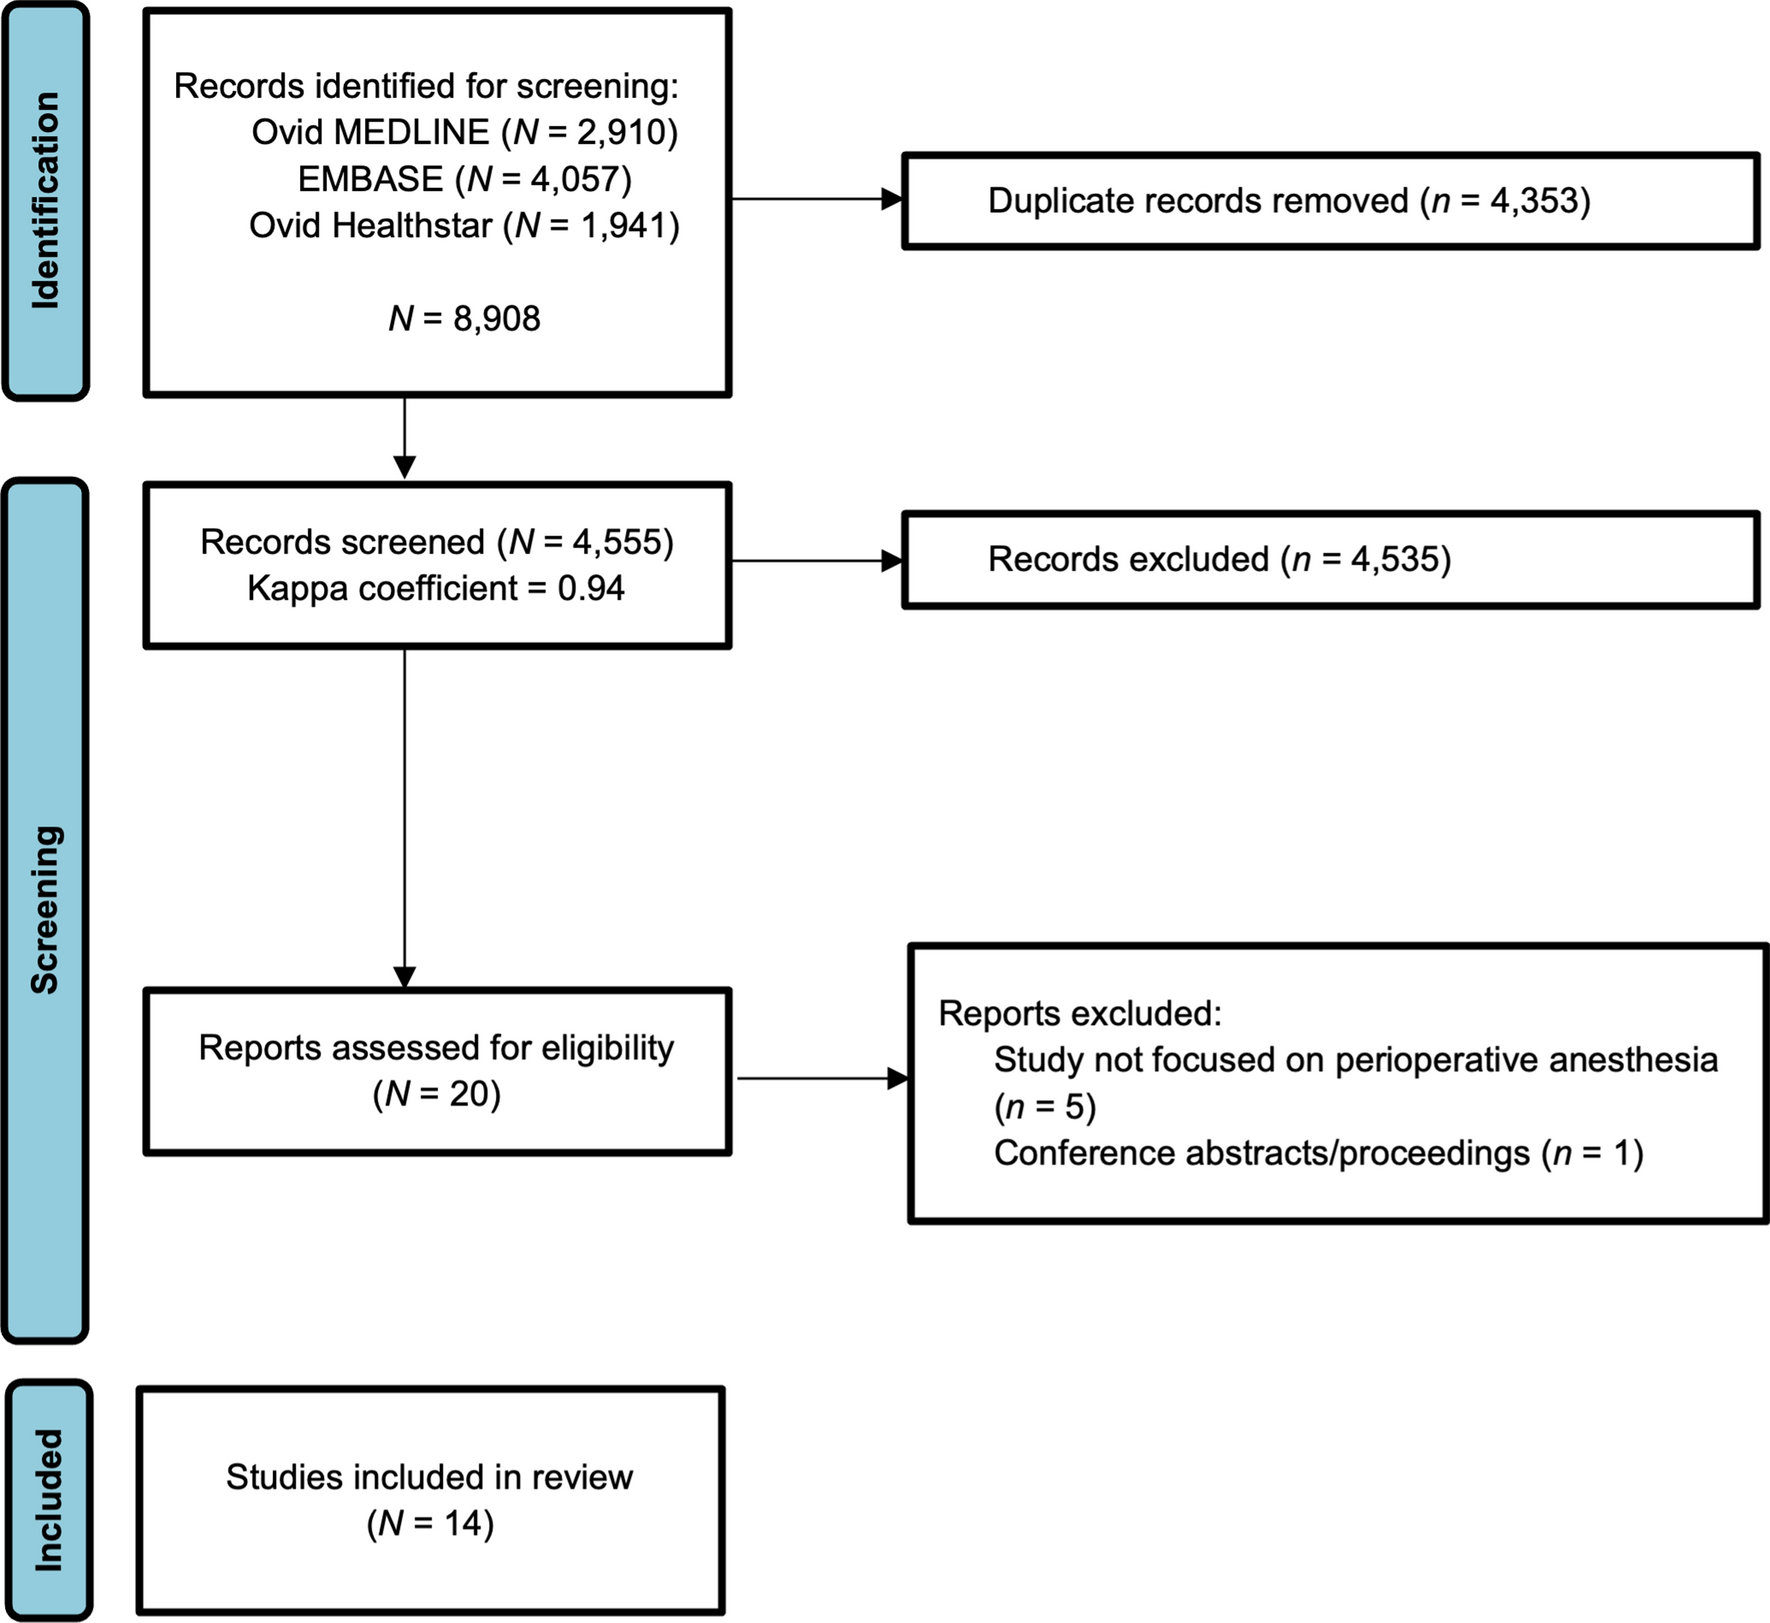 YouTube as a source of education in perioperative anesthesia for patients and trainees: a systematic review